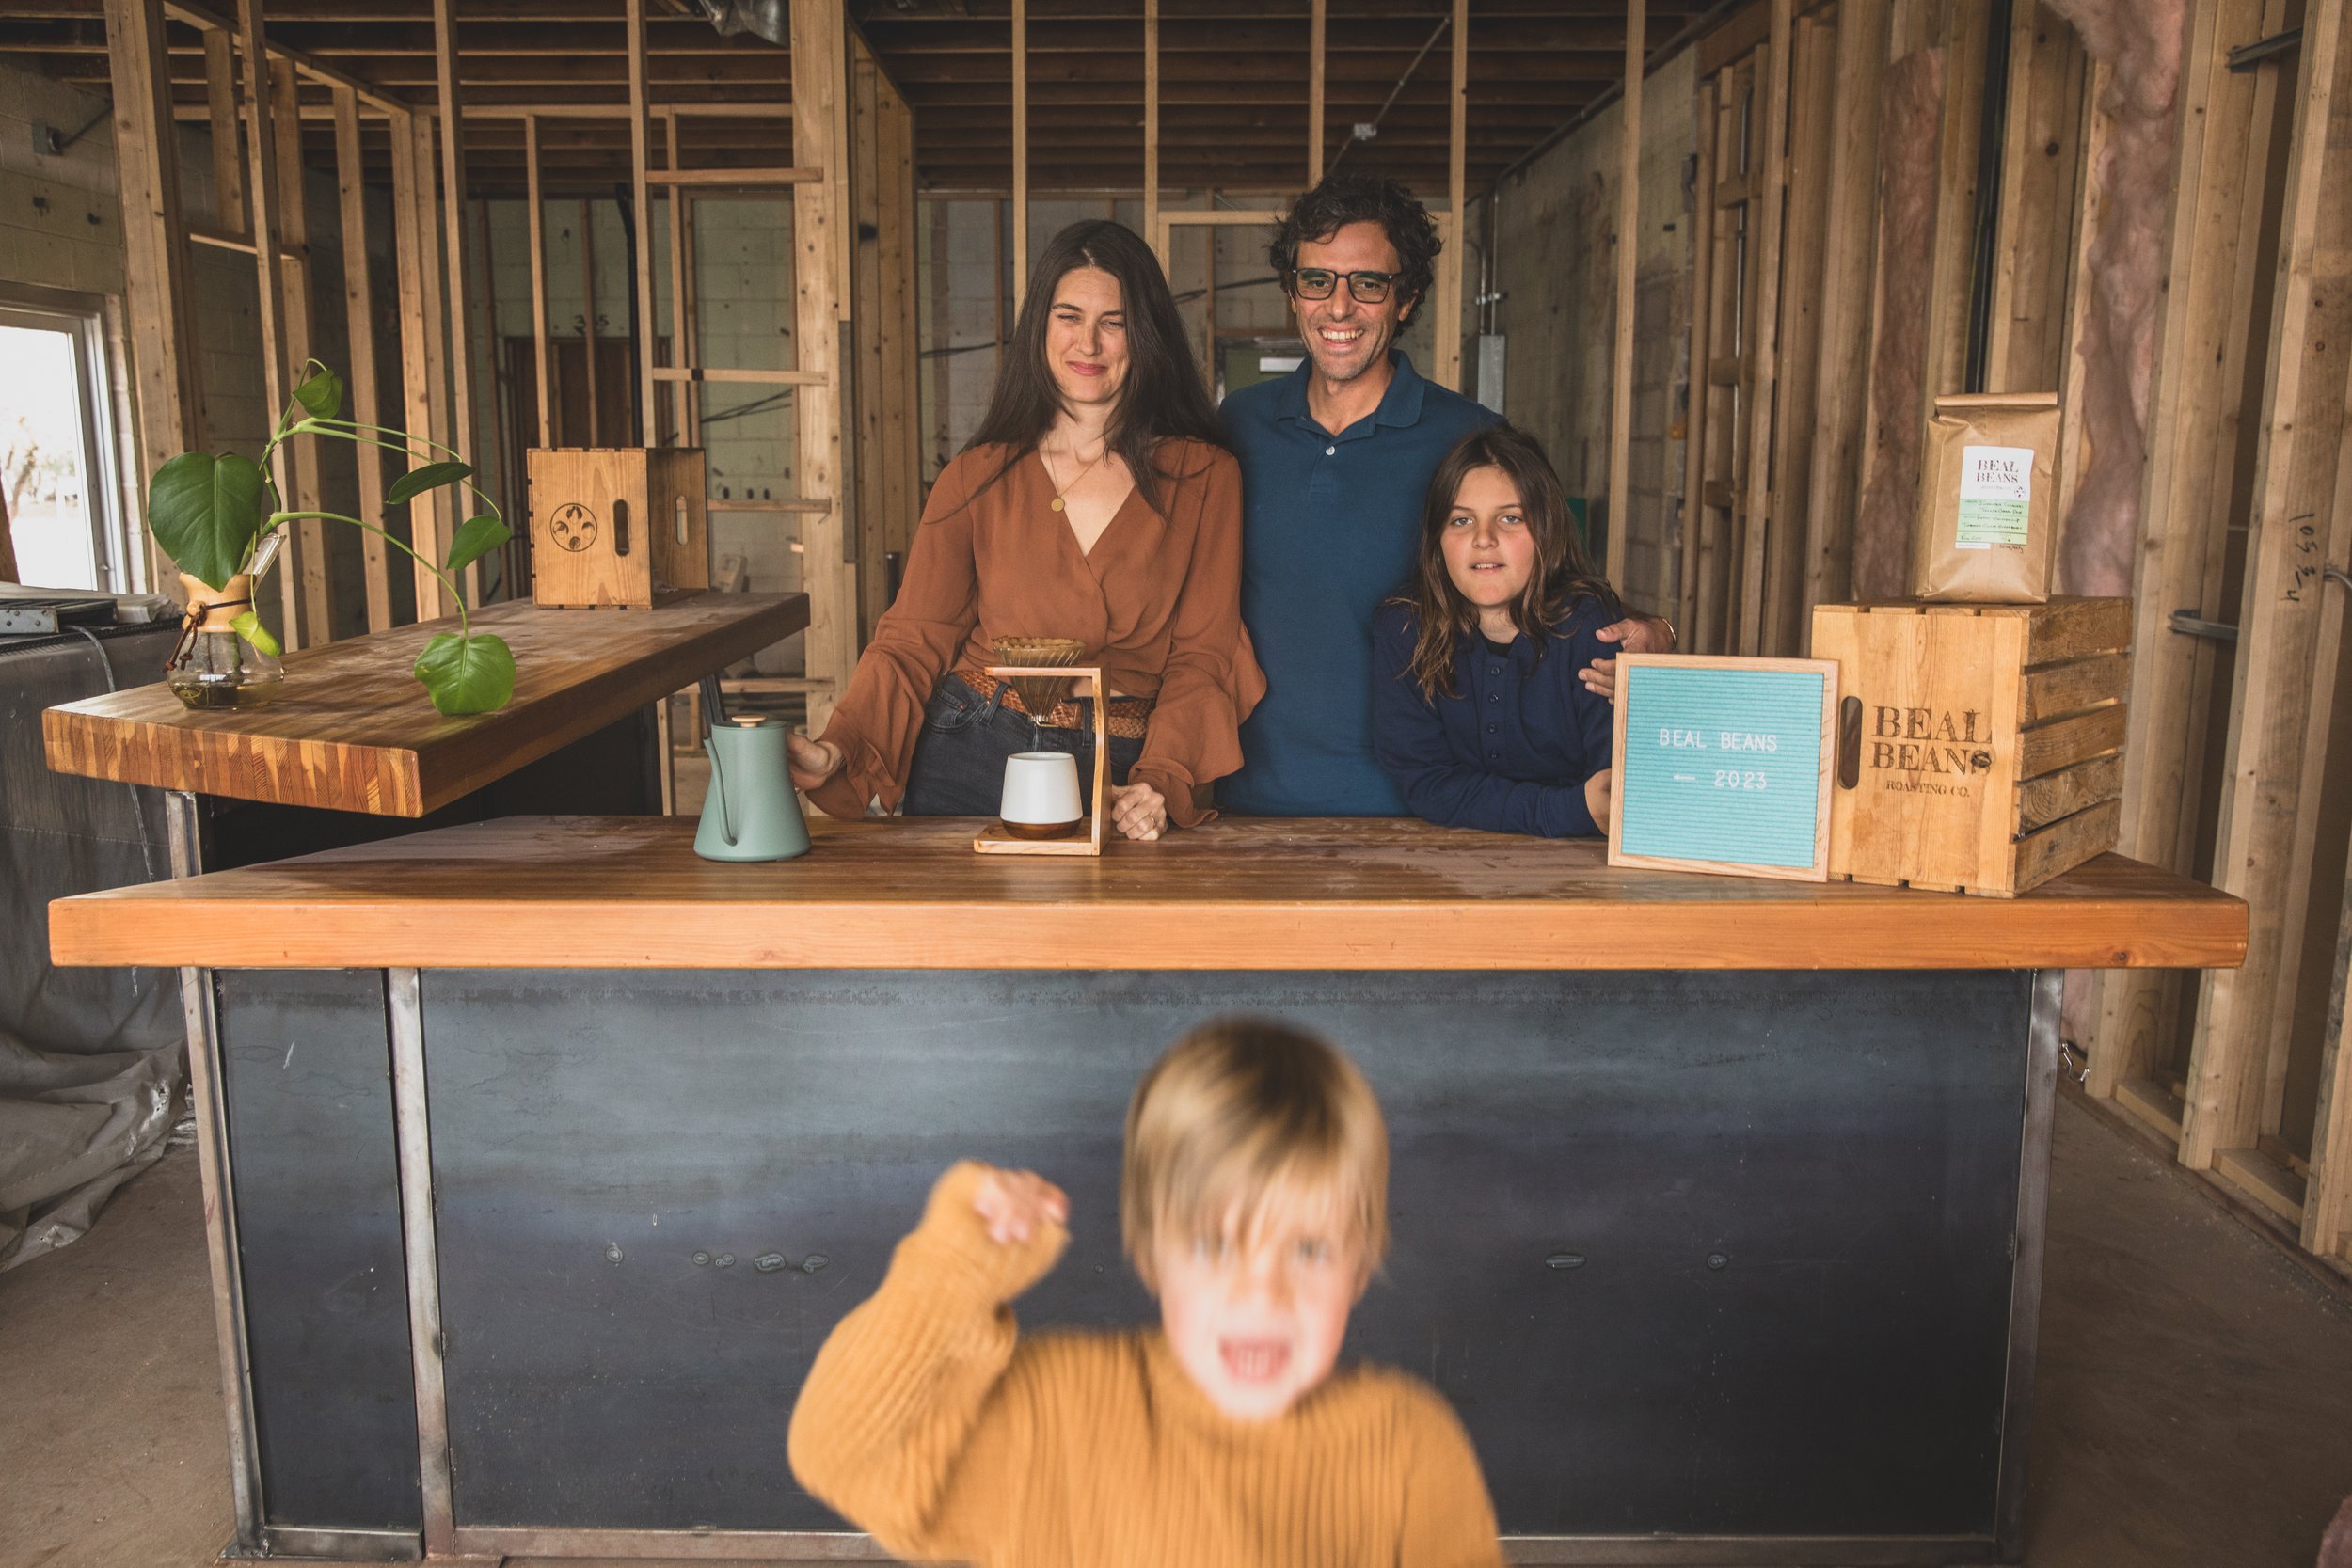 Unposed Family photo session in the unfinished Beal Beans’ new coffee shop coming to Sunnyslope, AZ by Arizona family photographer, Jennifer Lind Schutsky. 